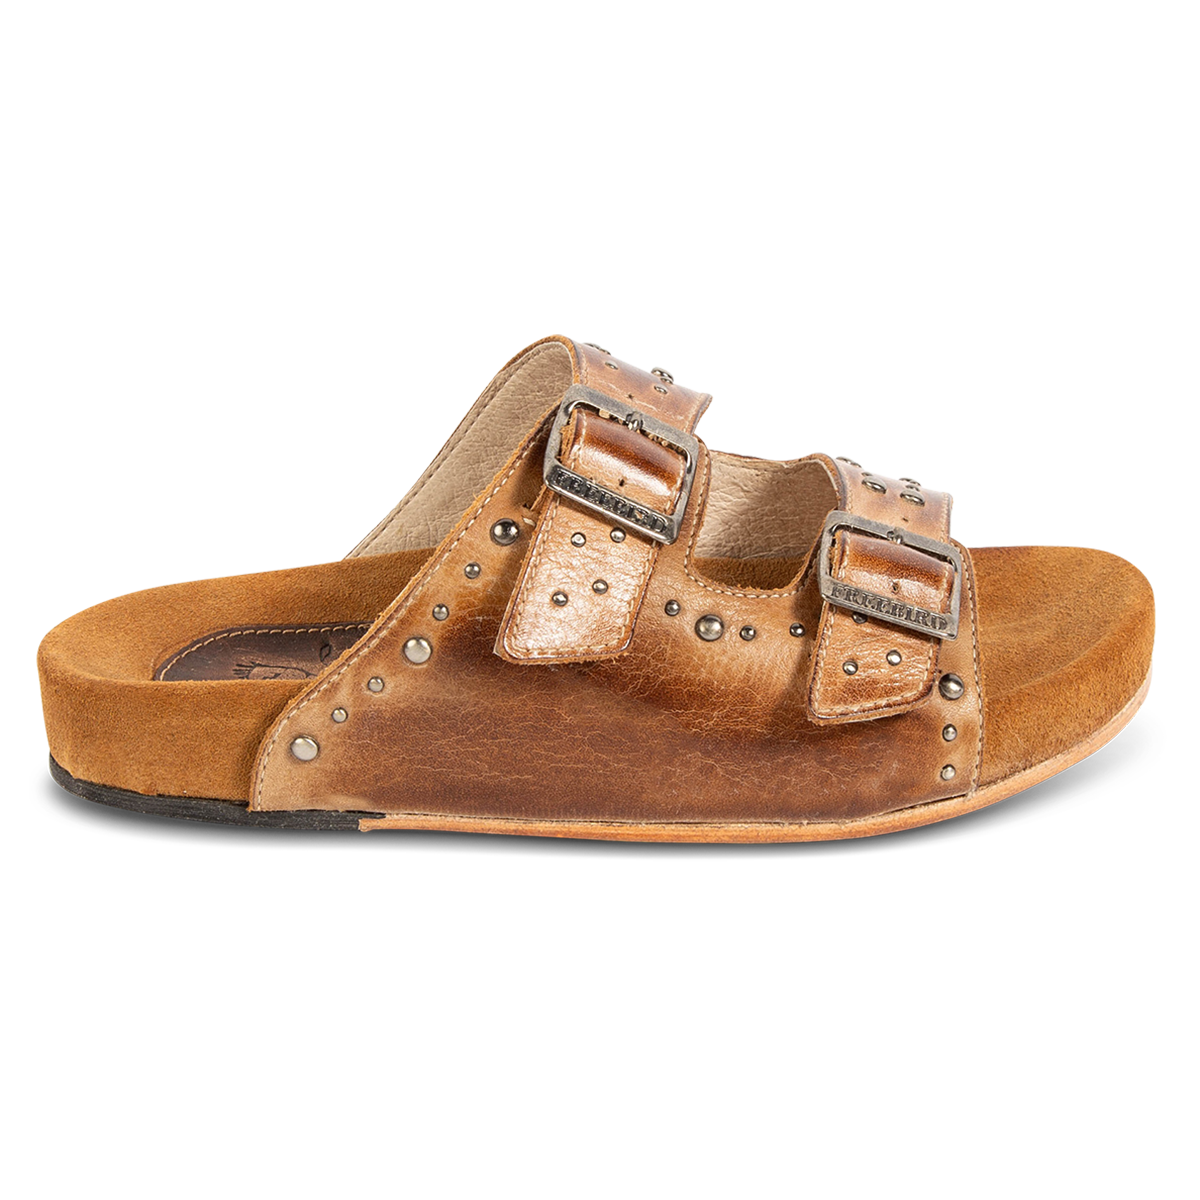 FREEBIRD women's Asher wheat leather sandal with adjustable belt buckles, a suede footbed and silver embellishments